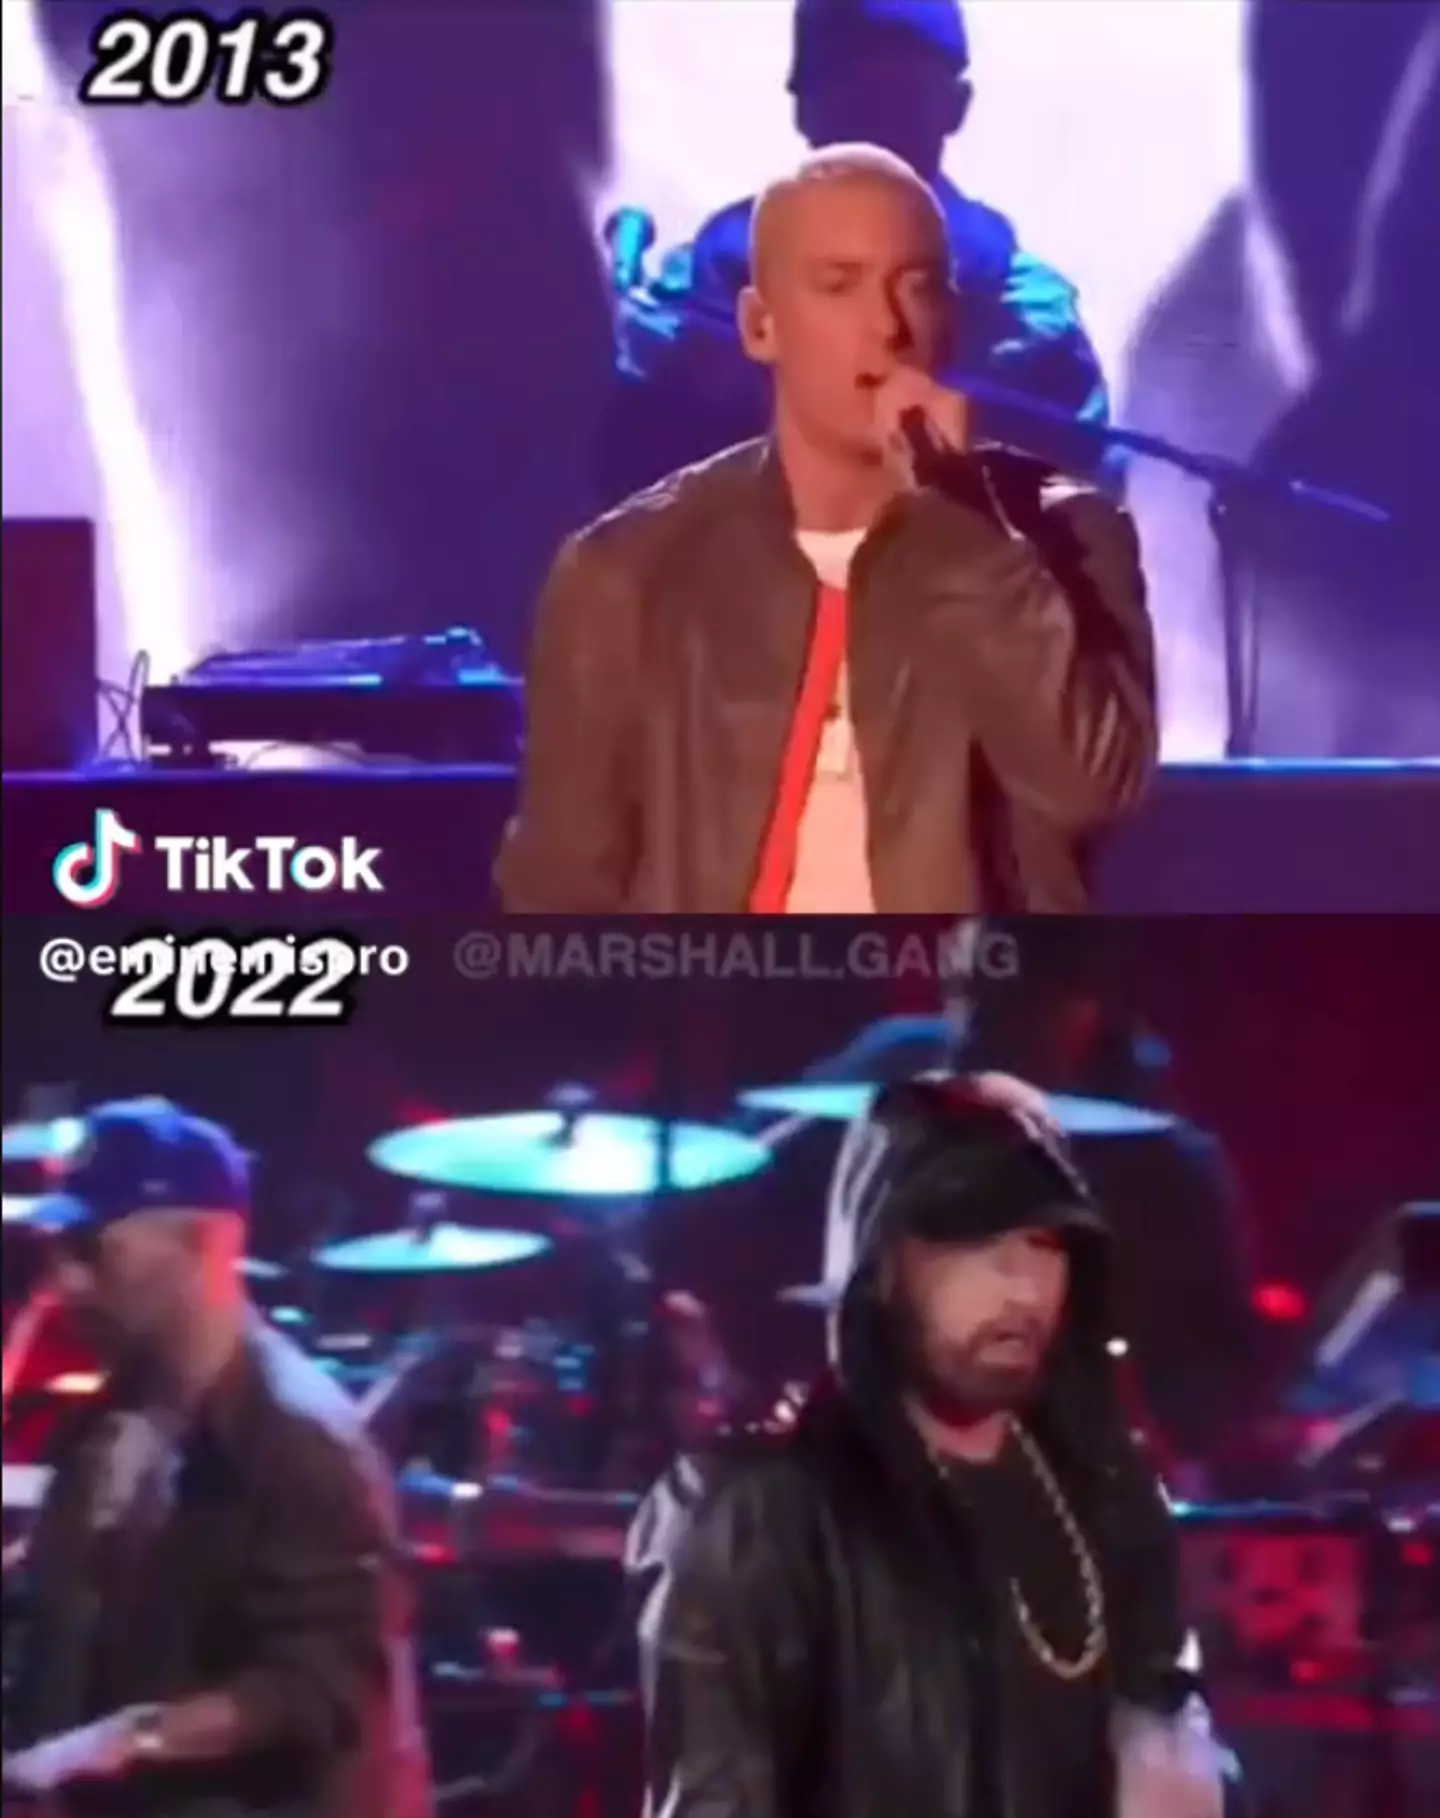 Nine years may have passed between the clips, but Eminem's rapping ability hasn't changed one bit.